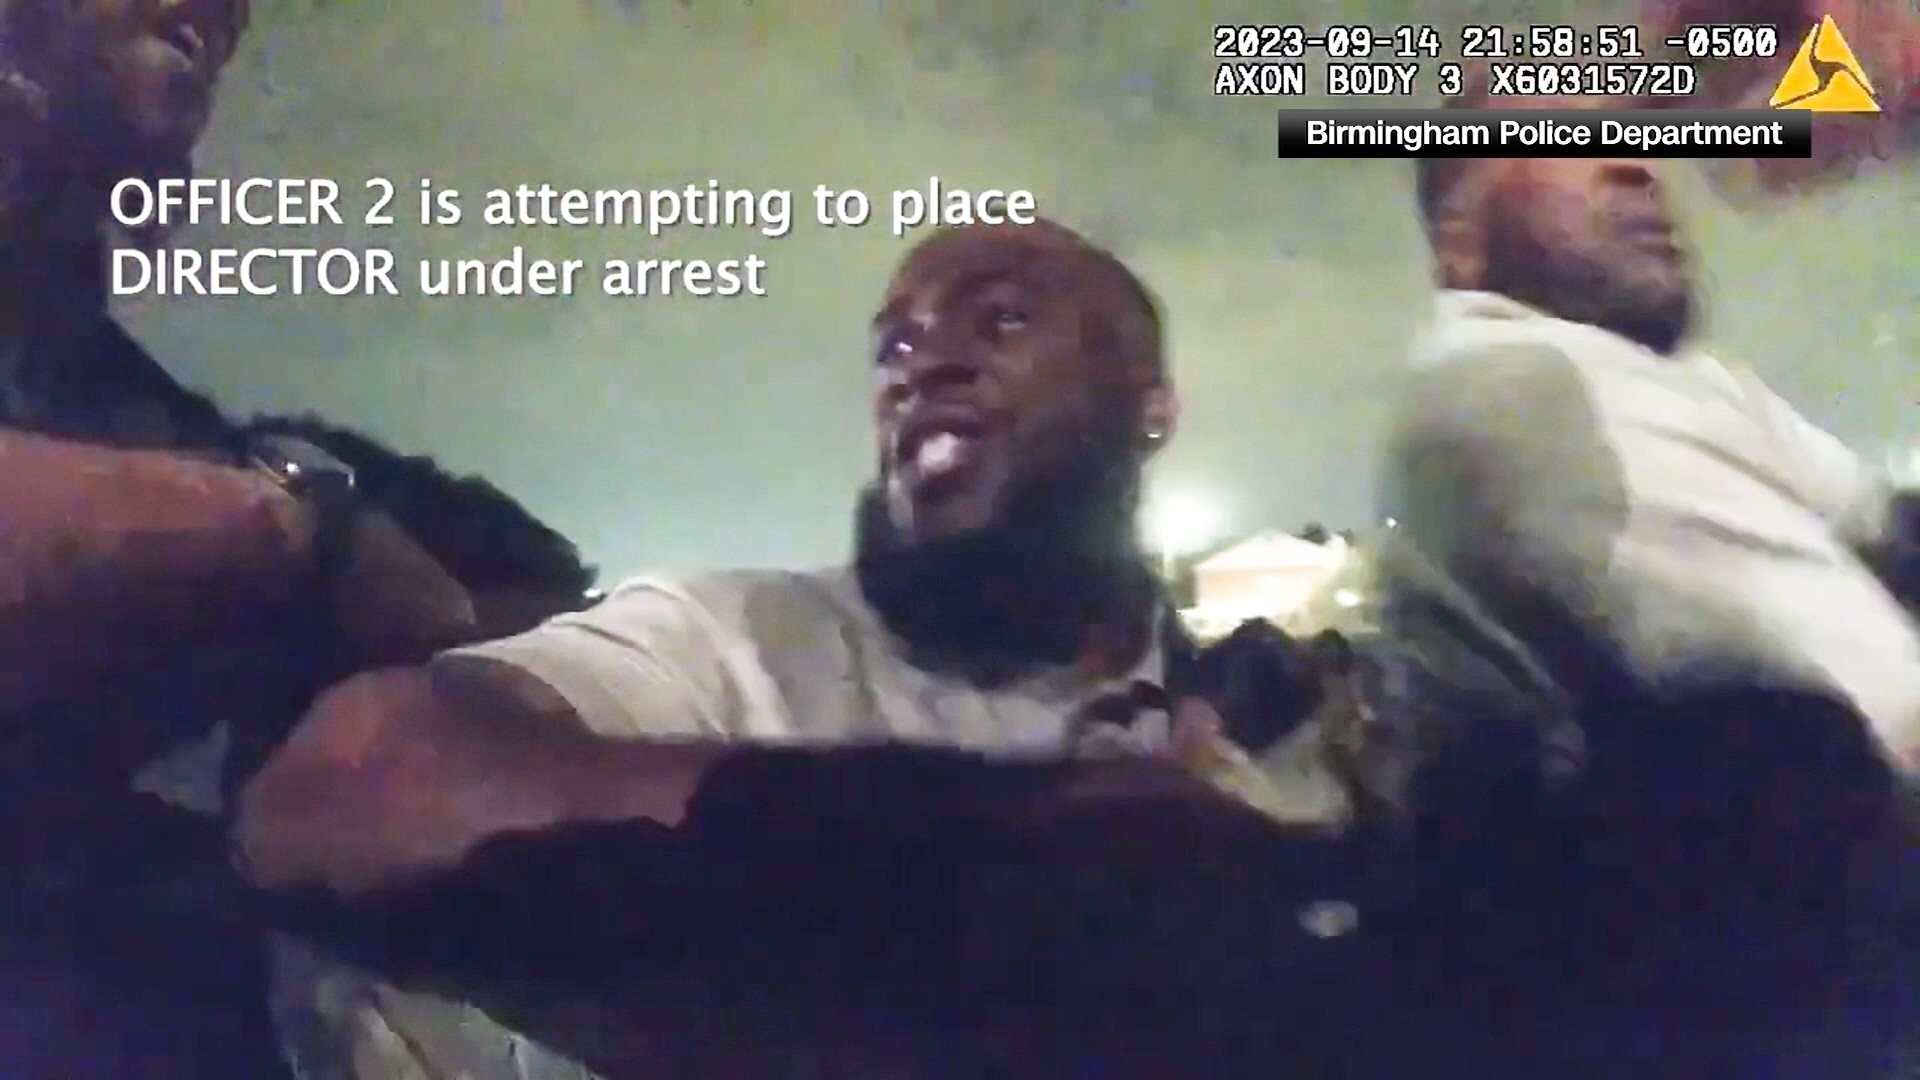 Bodycam video was released of an altercation resulting in the tasing and arrest of high school band director Johnny Mims.